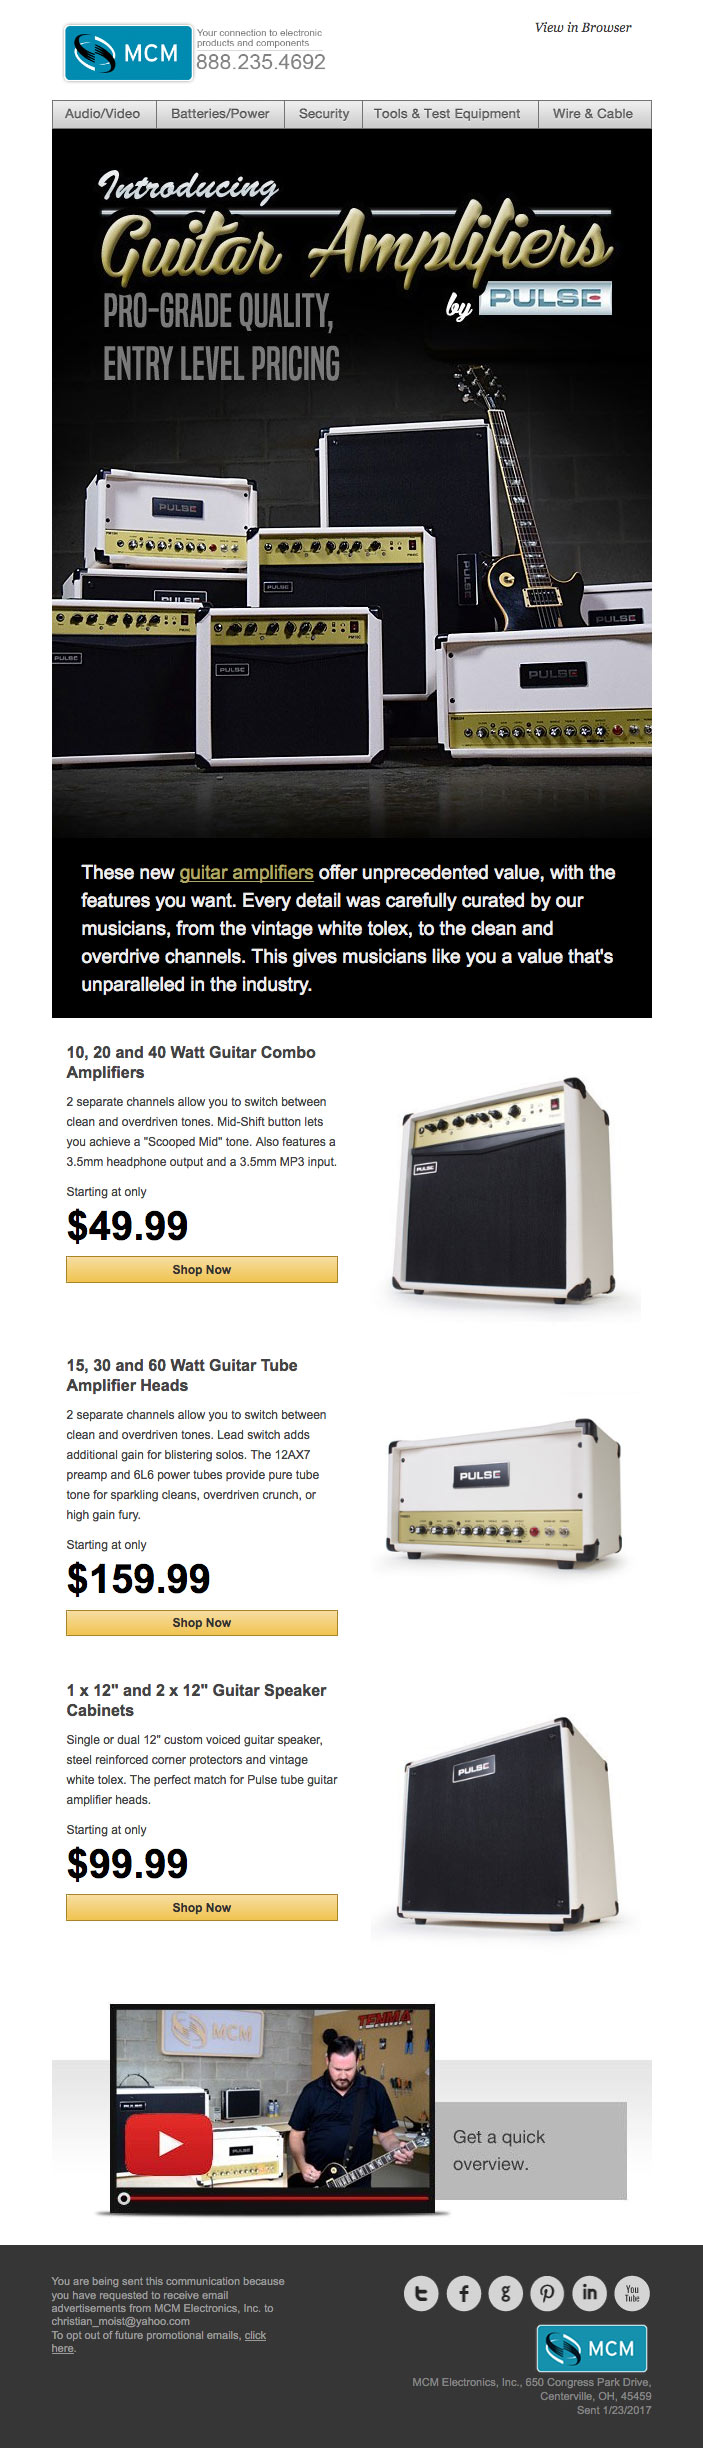 The Guitar Amps You've Been Waiting For